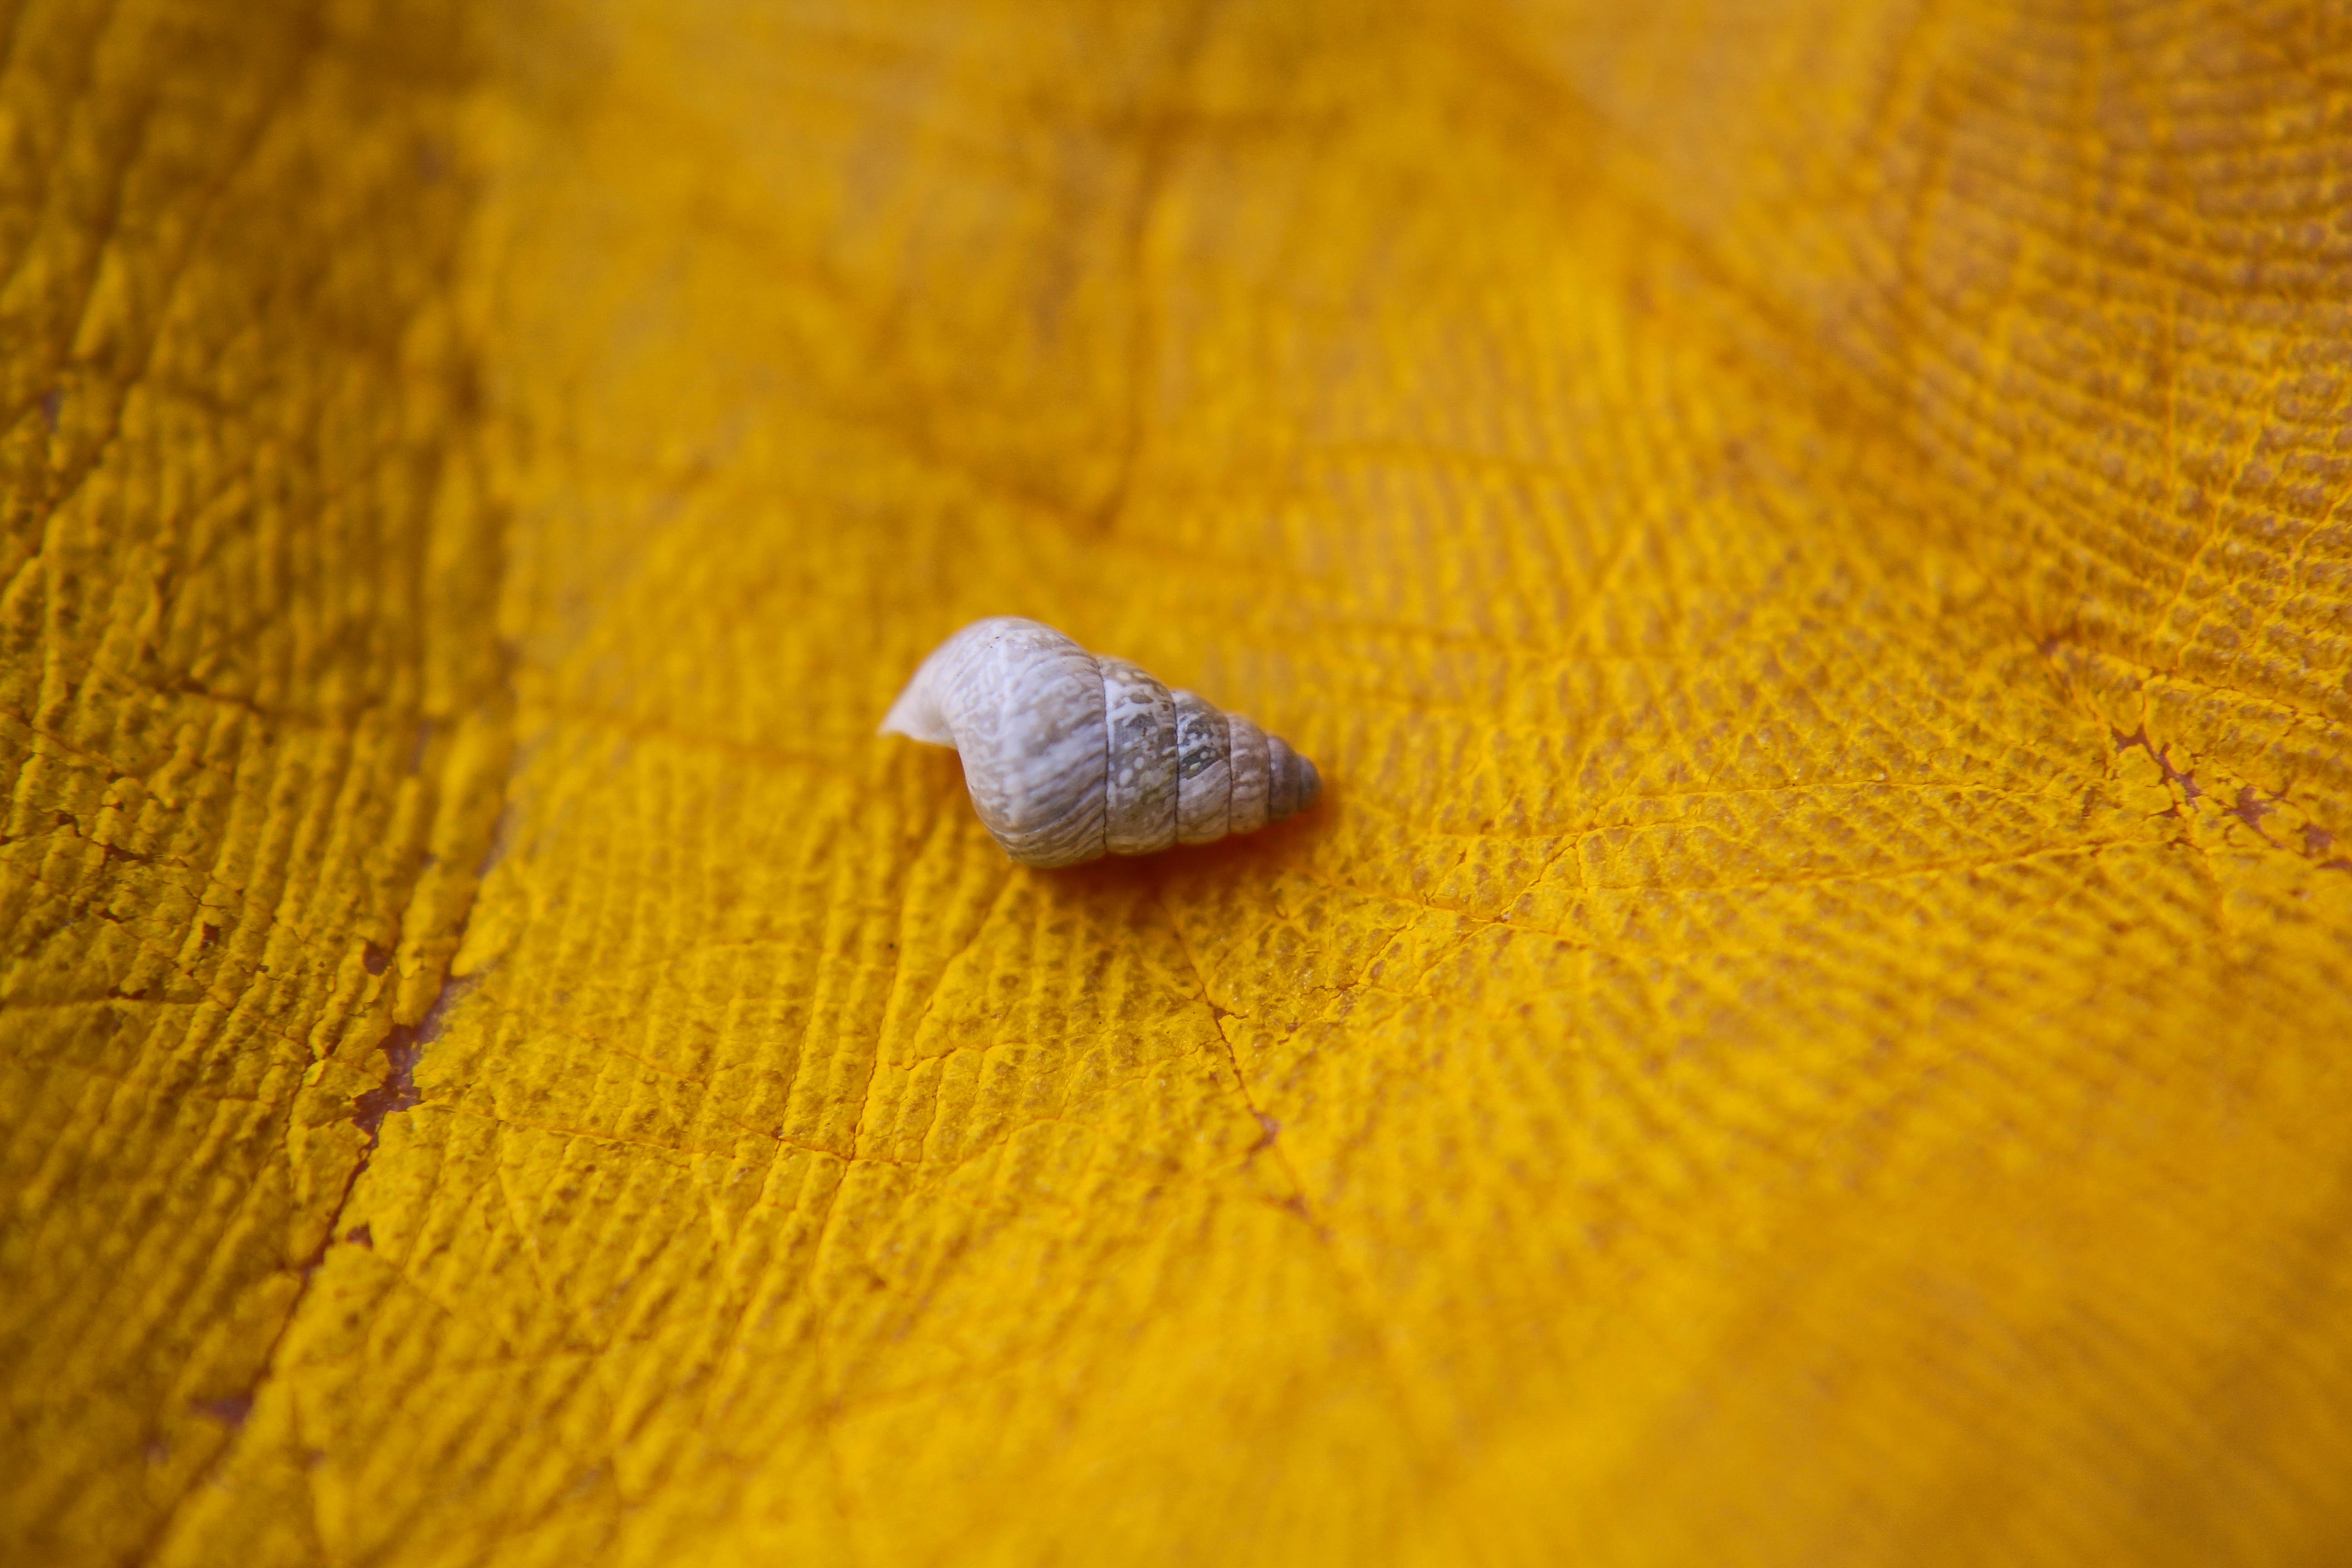 grey shell on yellow textile